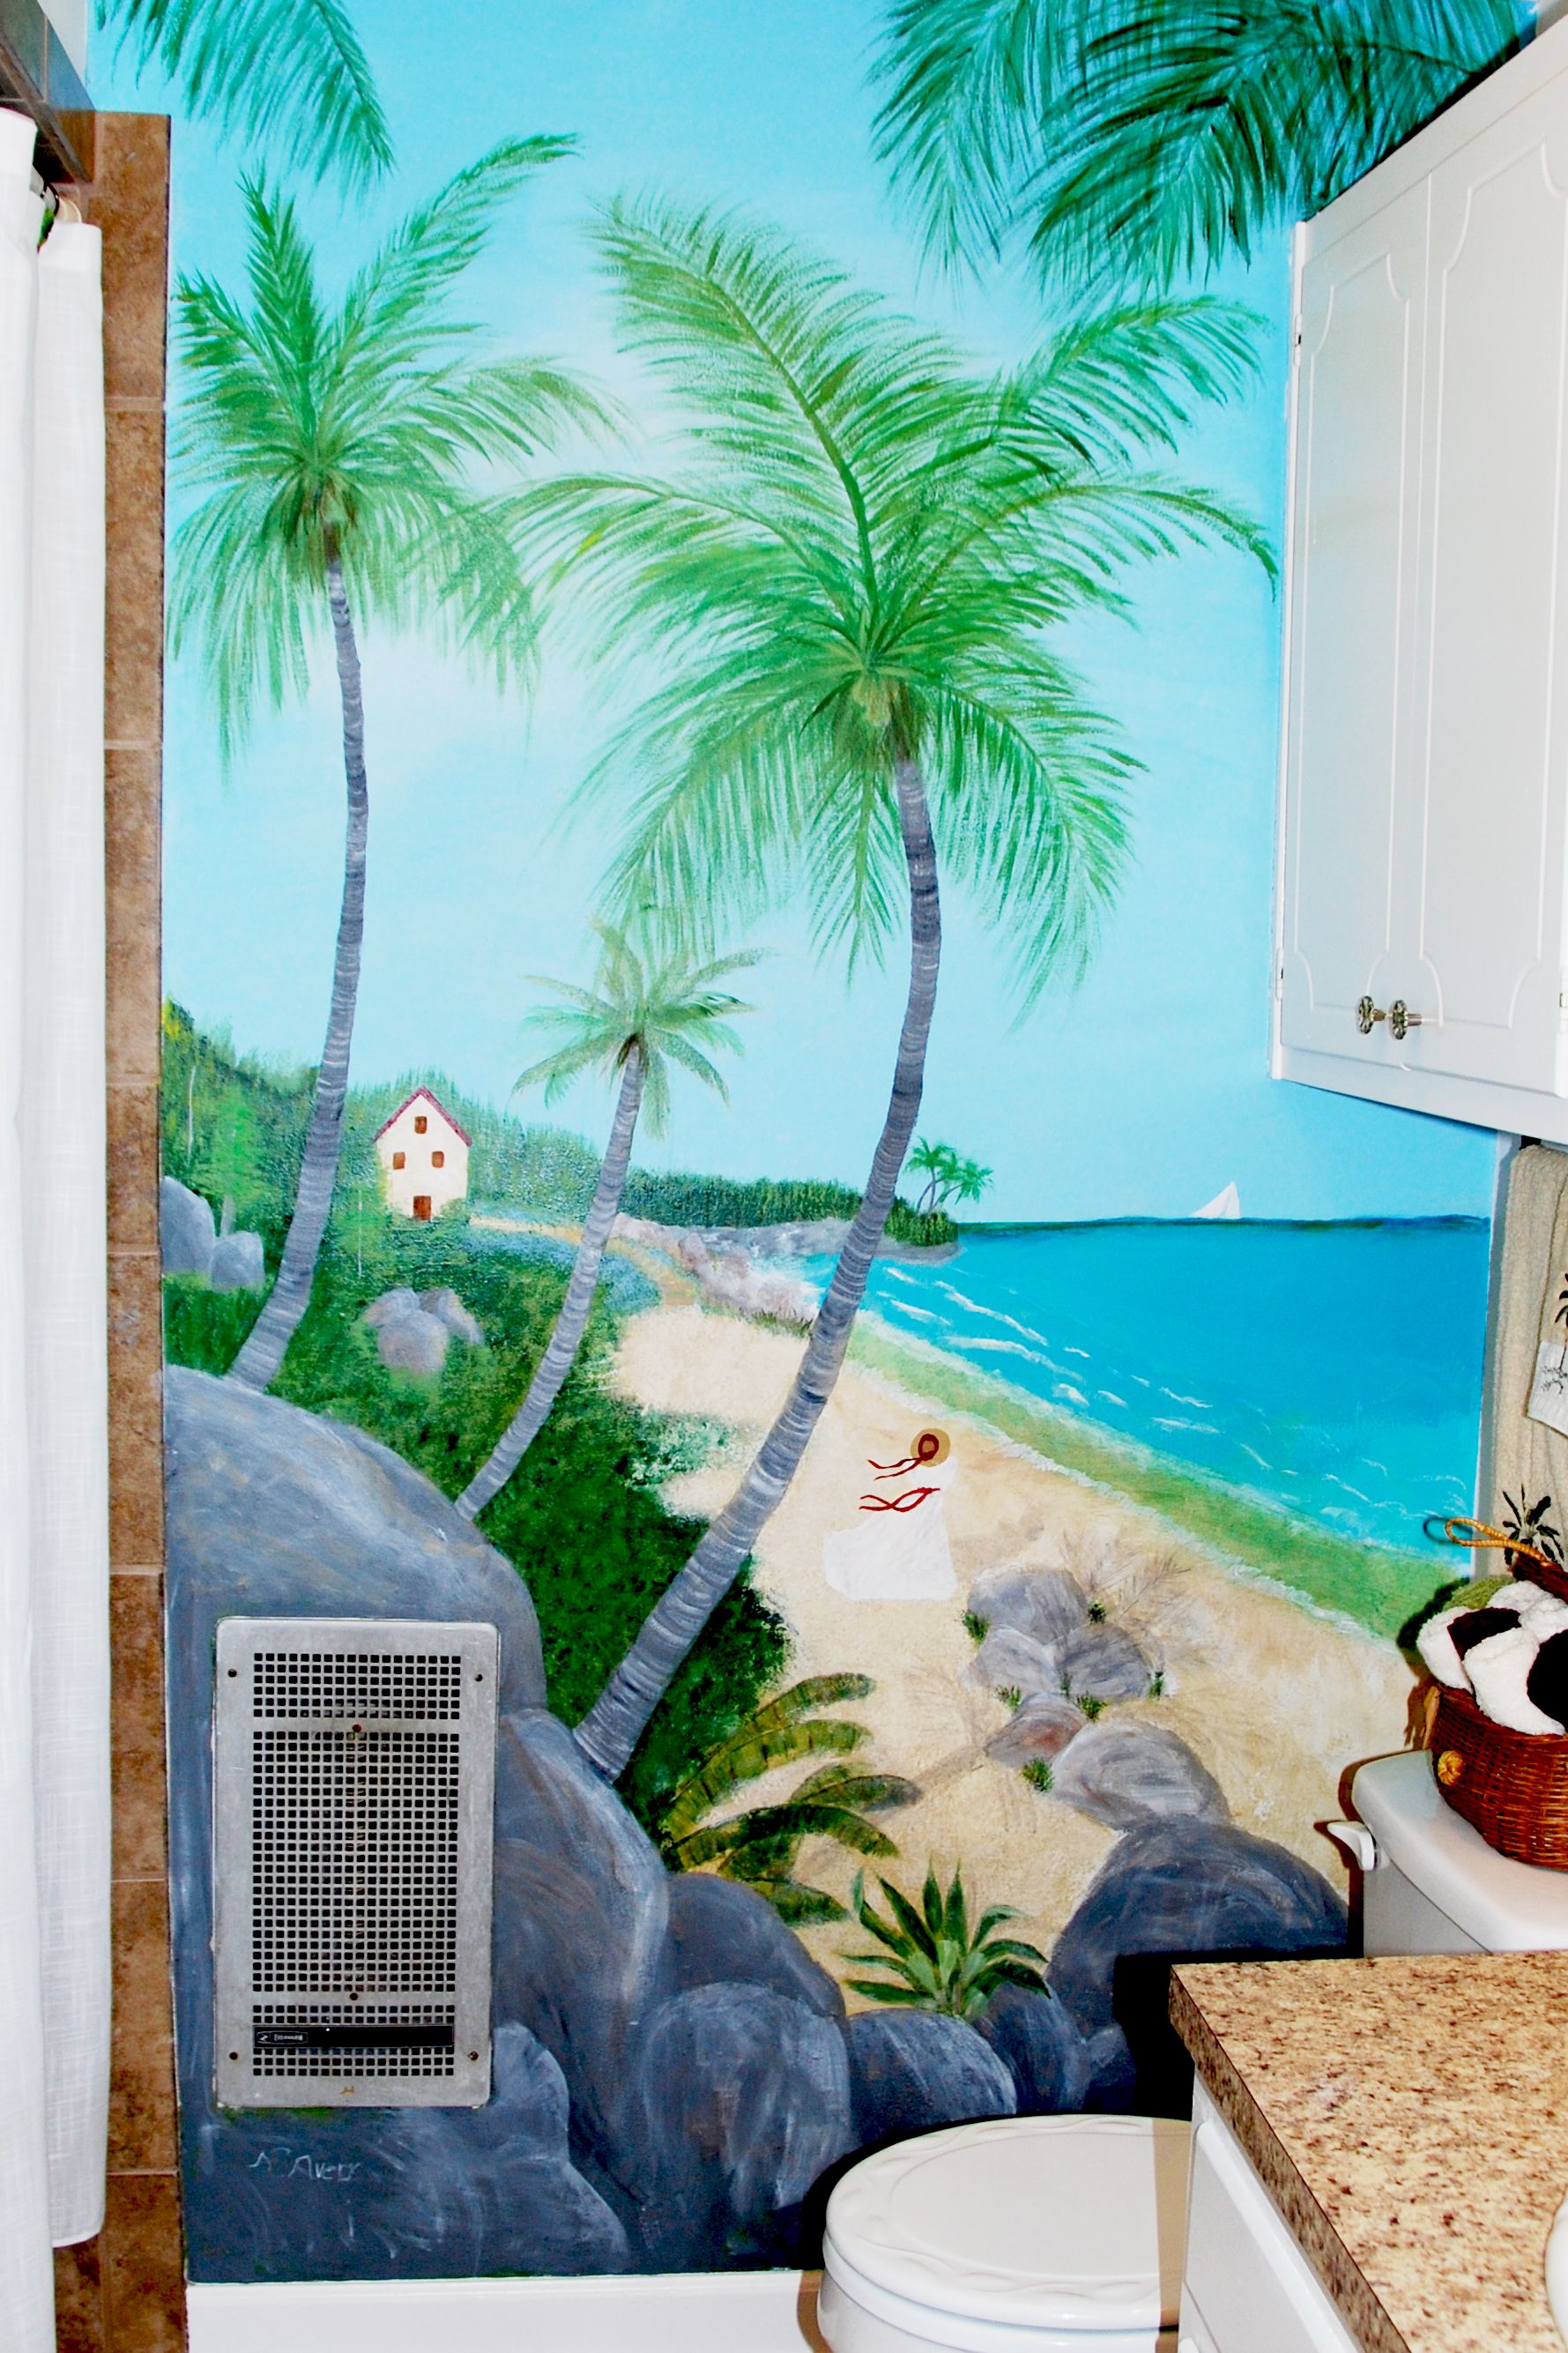 wallpaper scenes for walls,wall,mural,room,property,palm tree